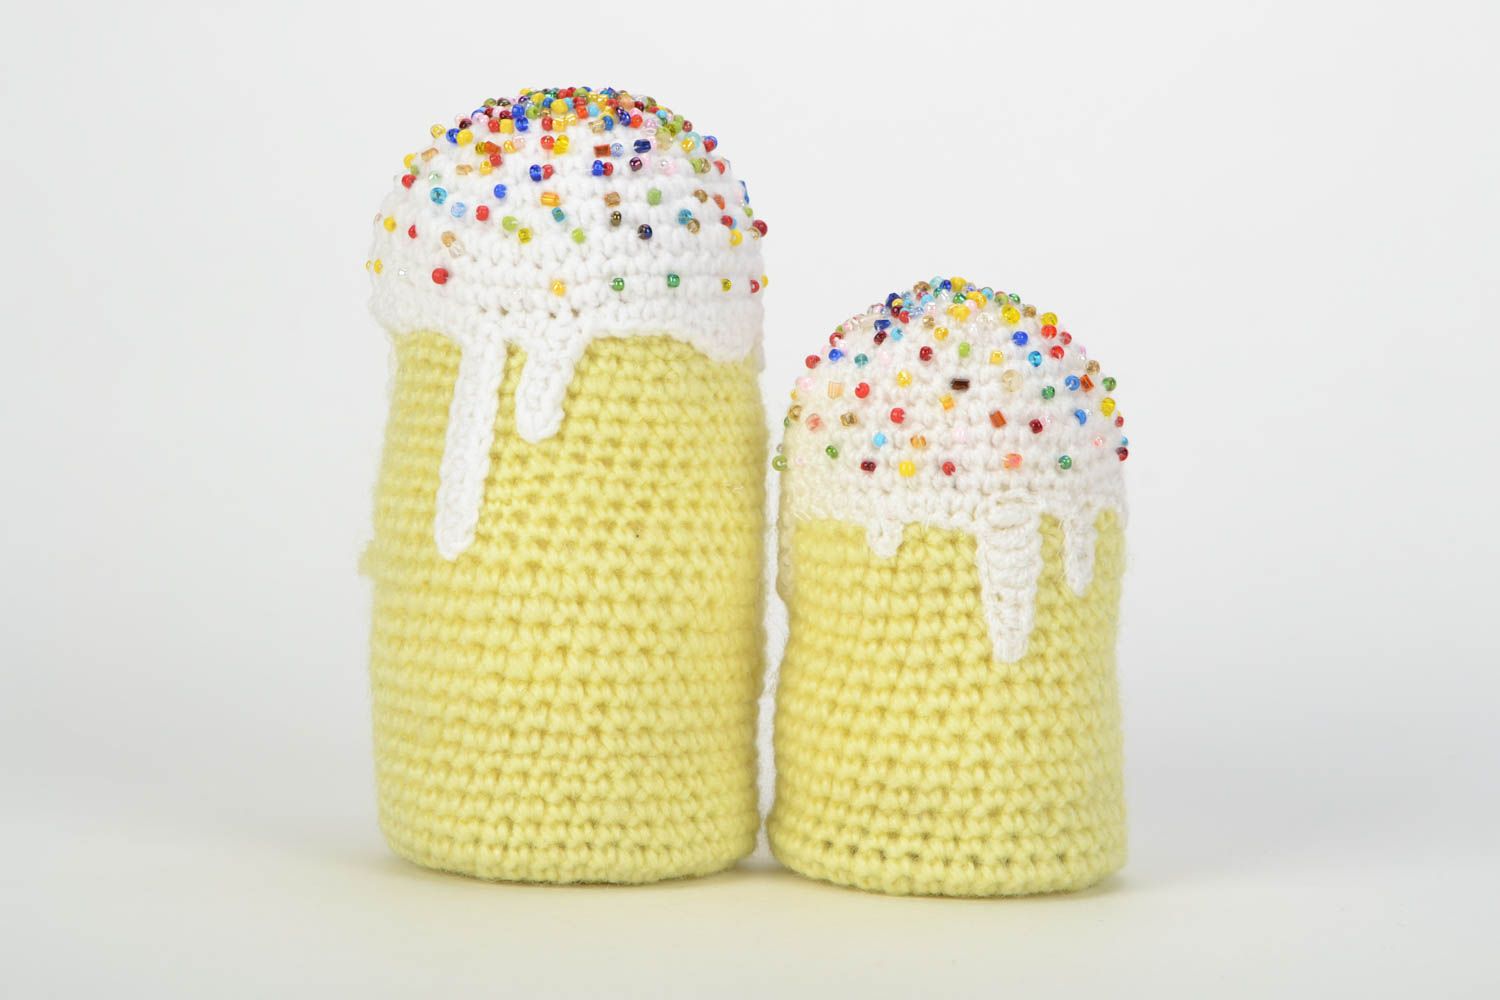 Set of homemade crochet Easter cakes 2 pieces holiday home decor photo 1